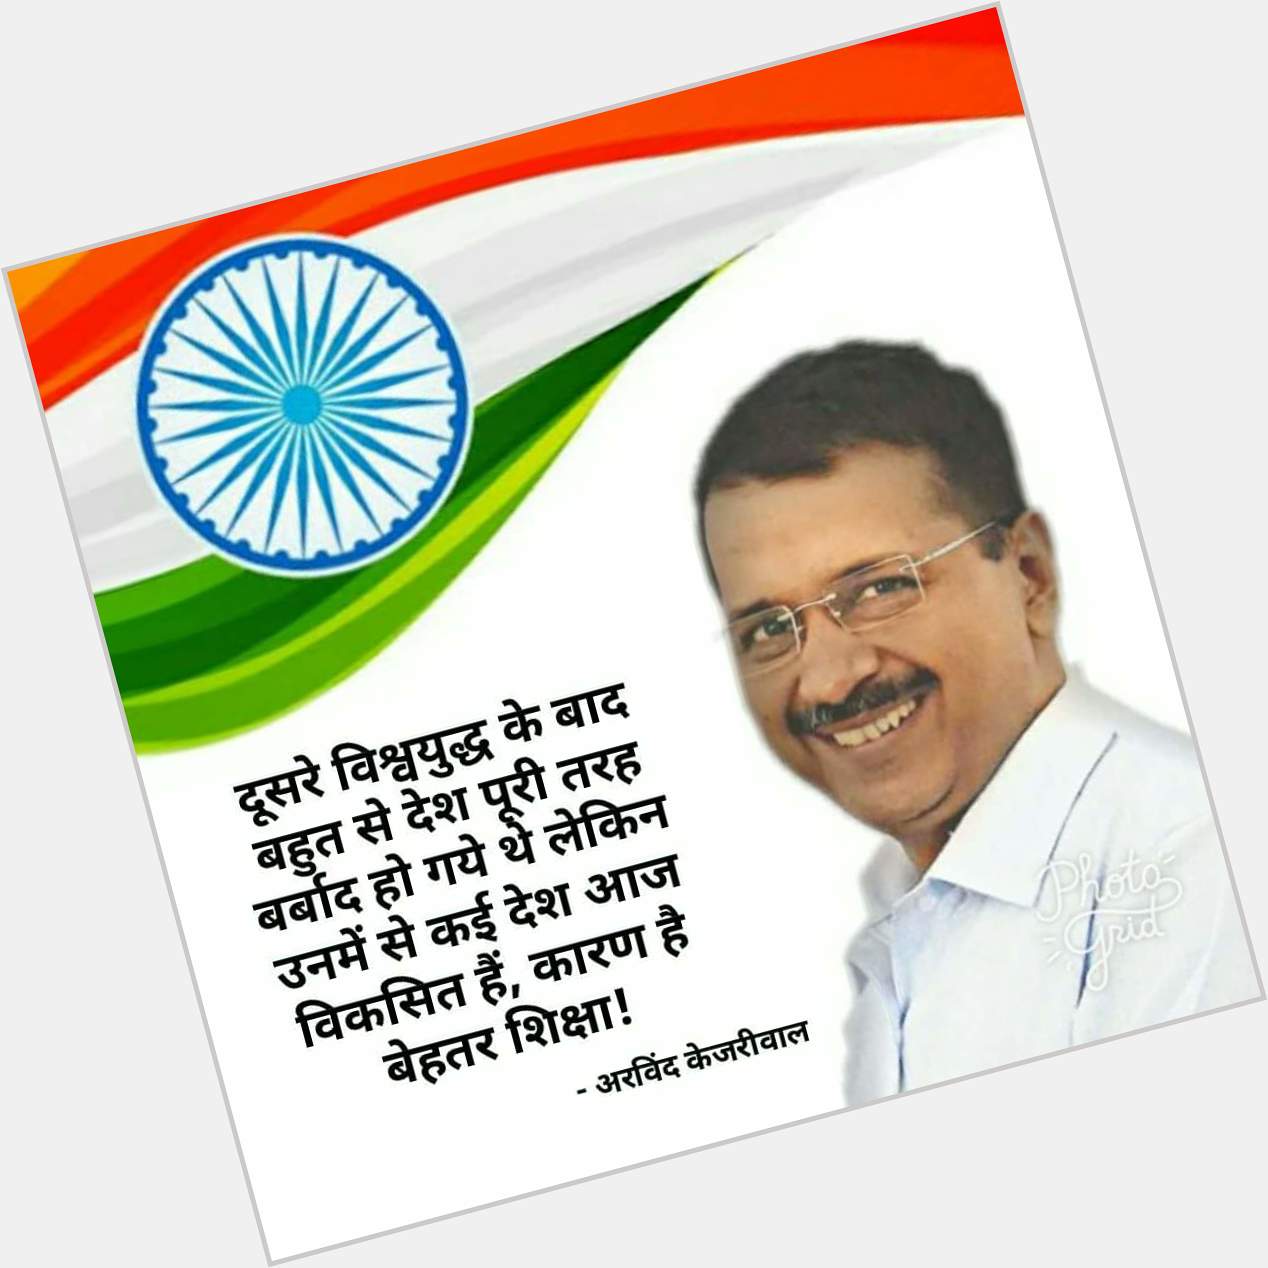 Happy birthday to arvind kejriwal
We want to see you as a pm of india soon..... 